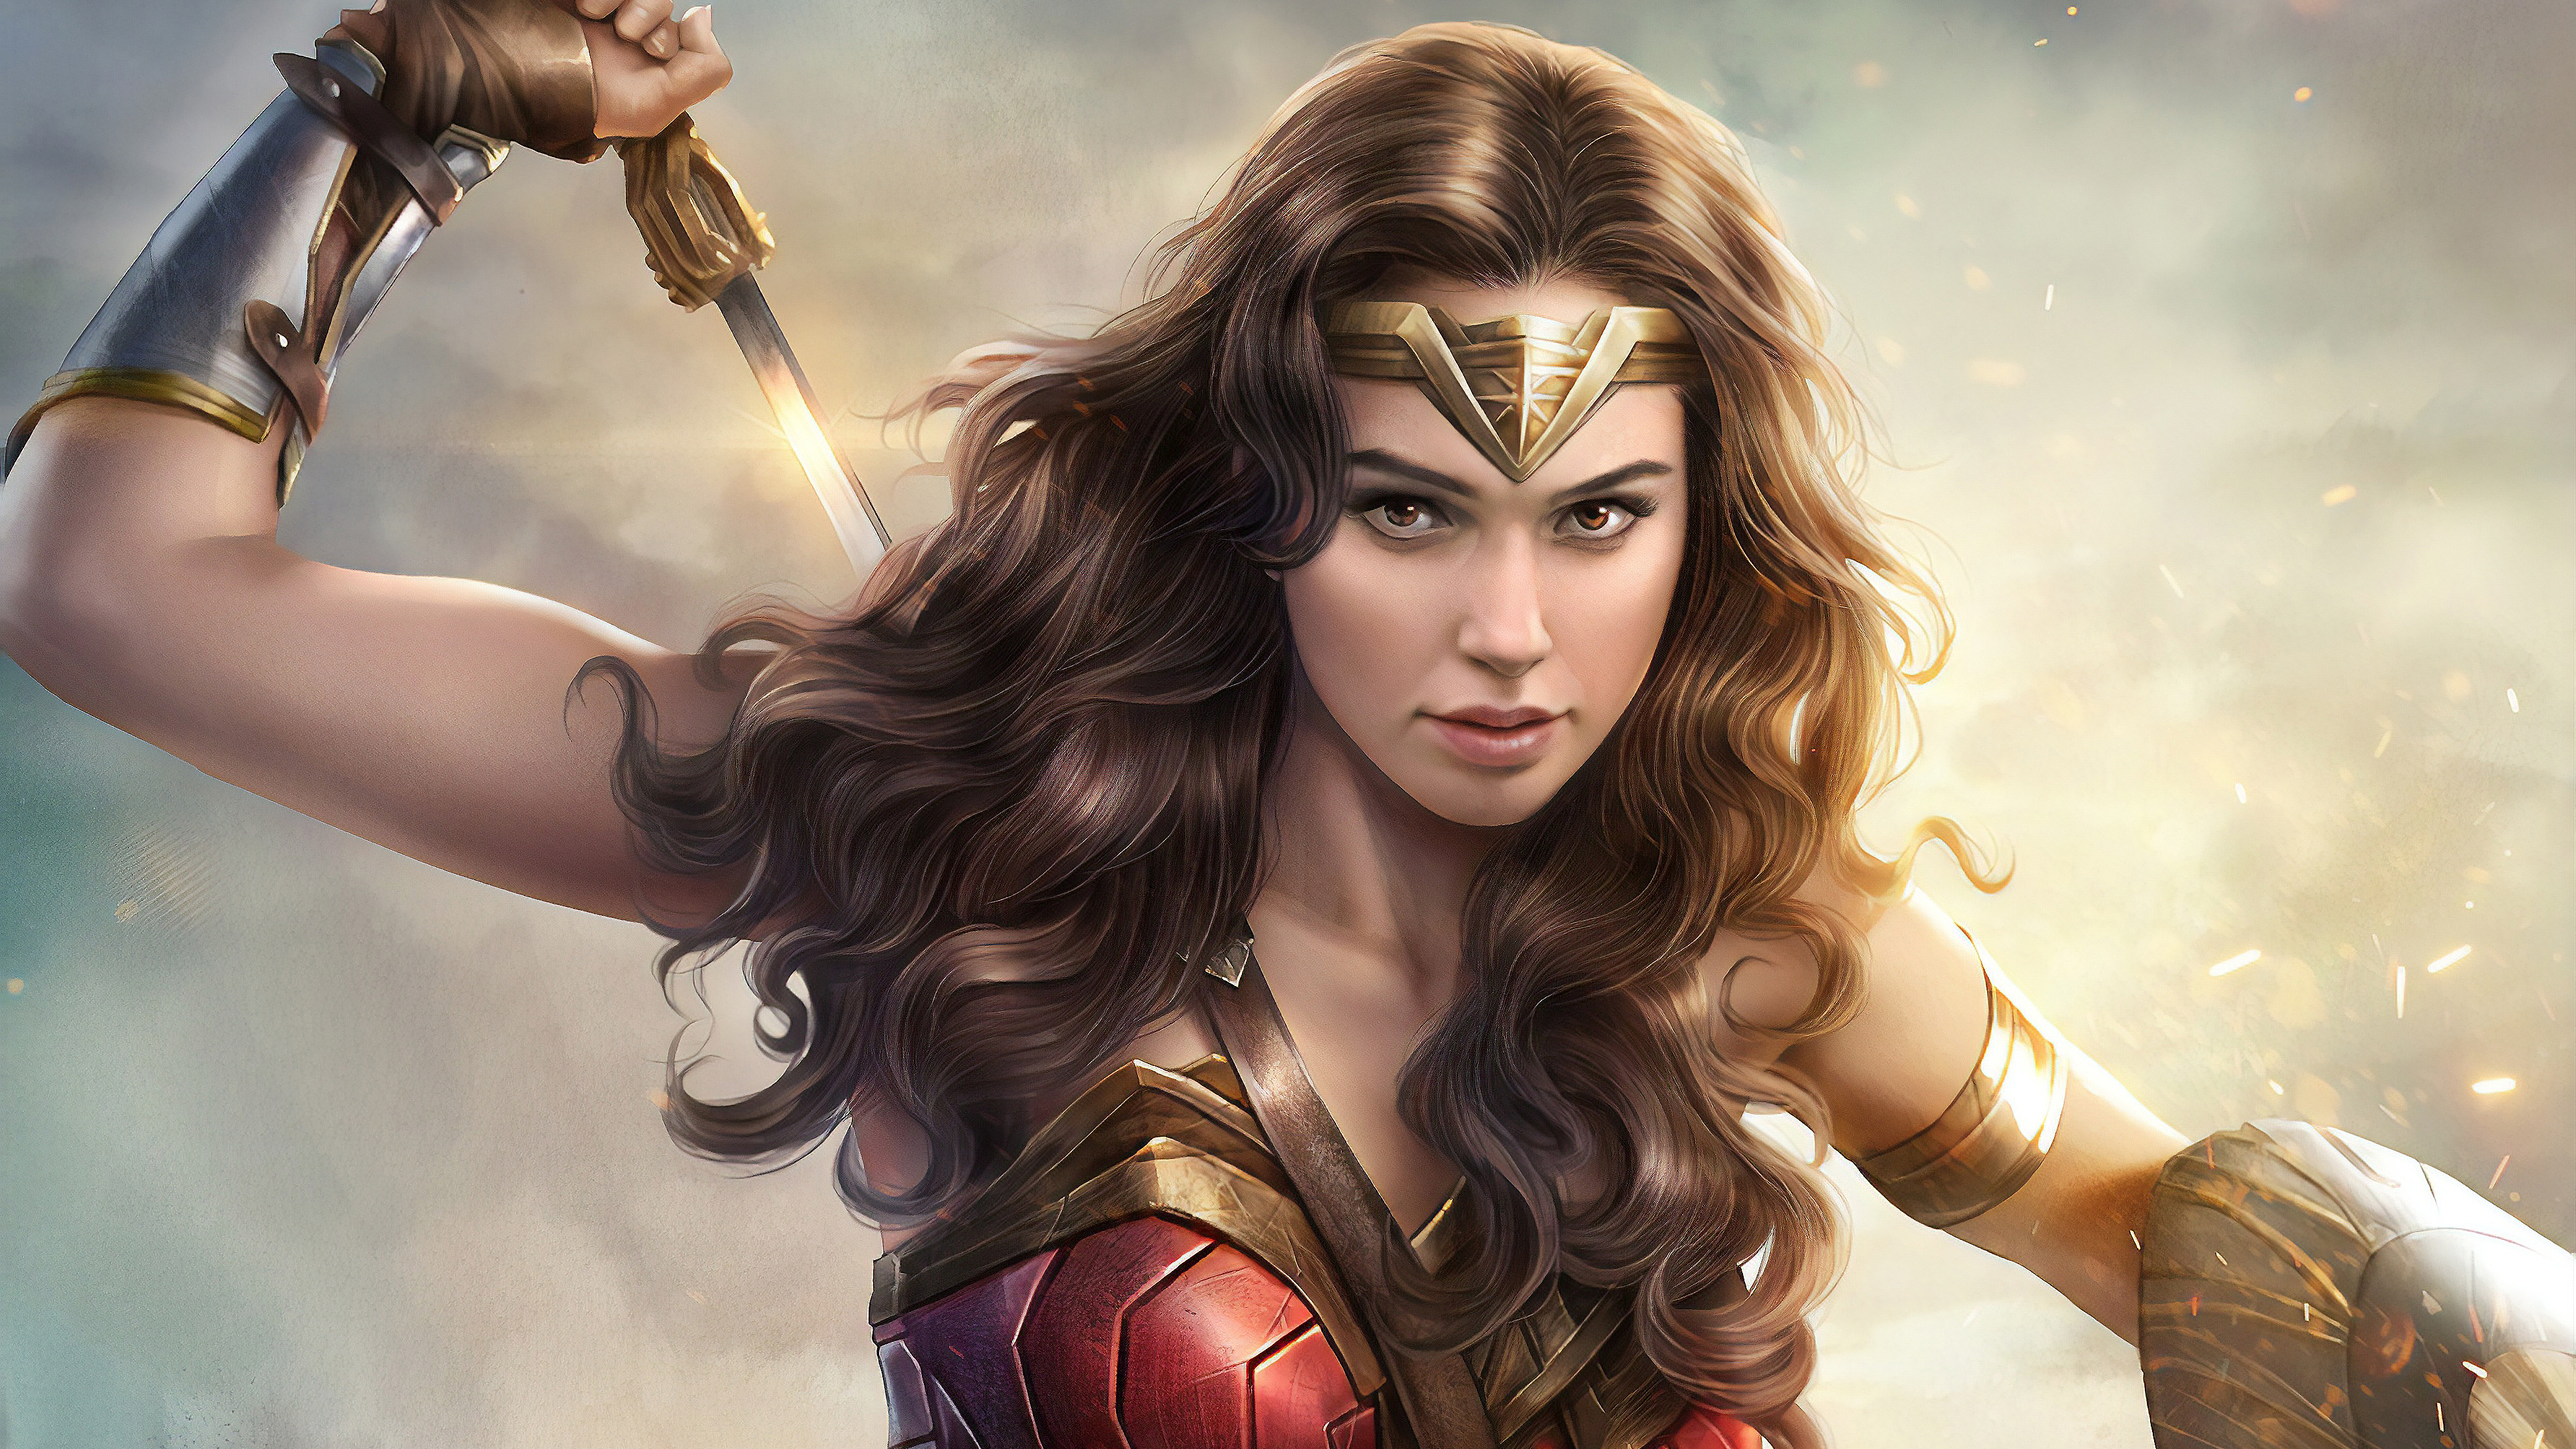 4k Gal Gadot Wonder Woman, HD Superheroes, 4k Wallpapers, Images,  Backgrounds, Photos and Pictures